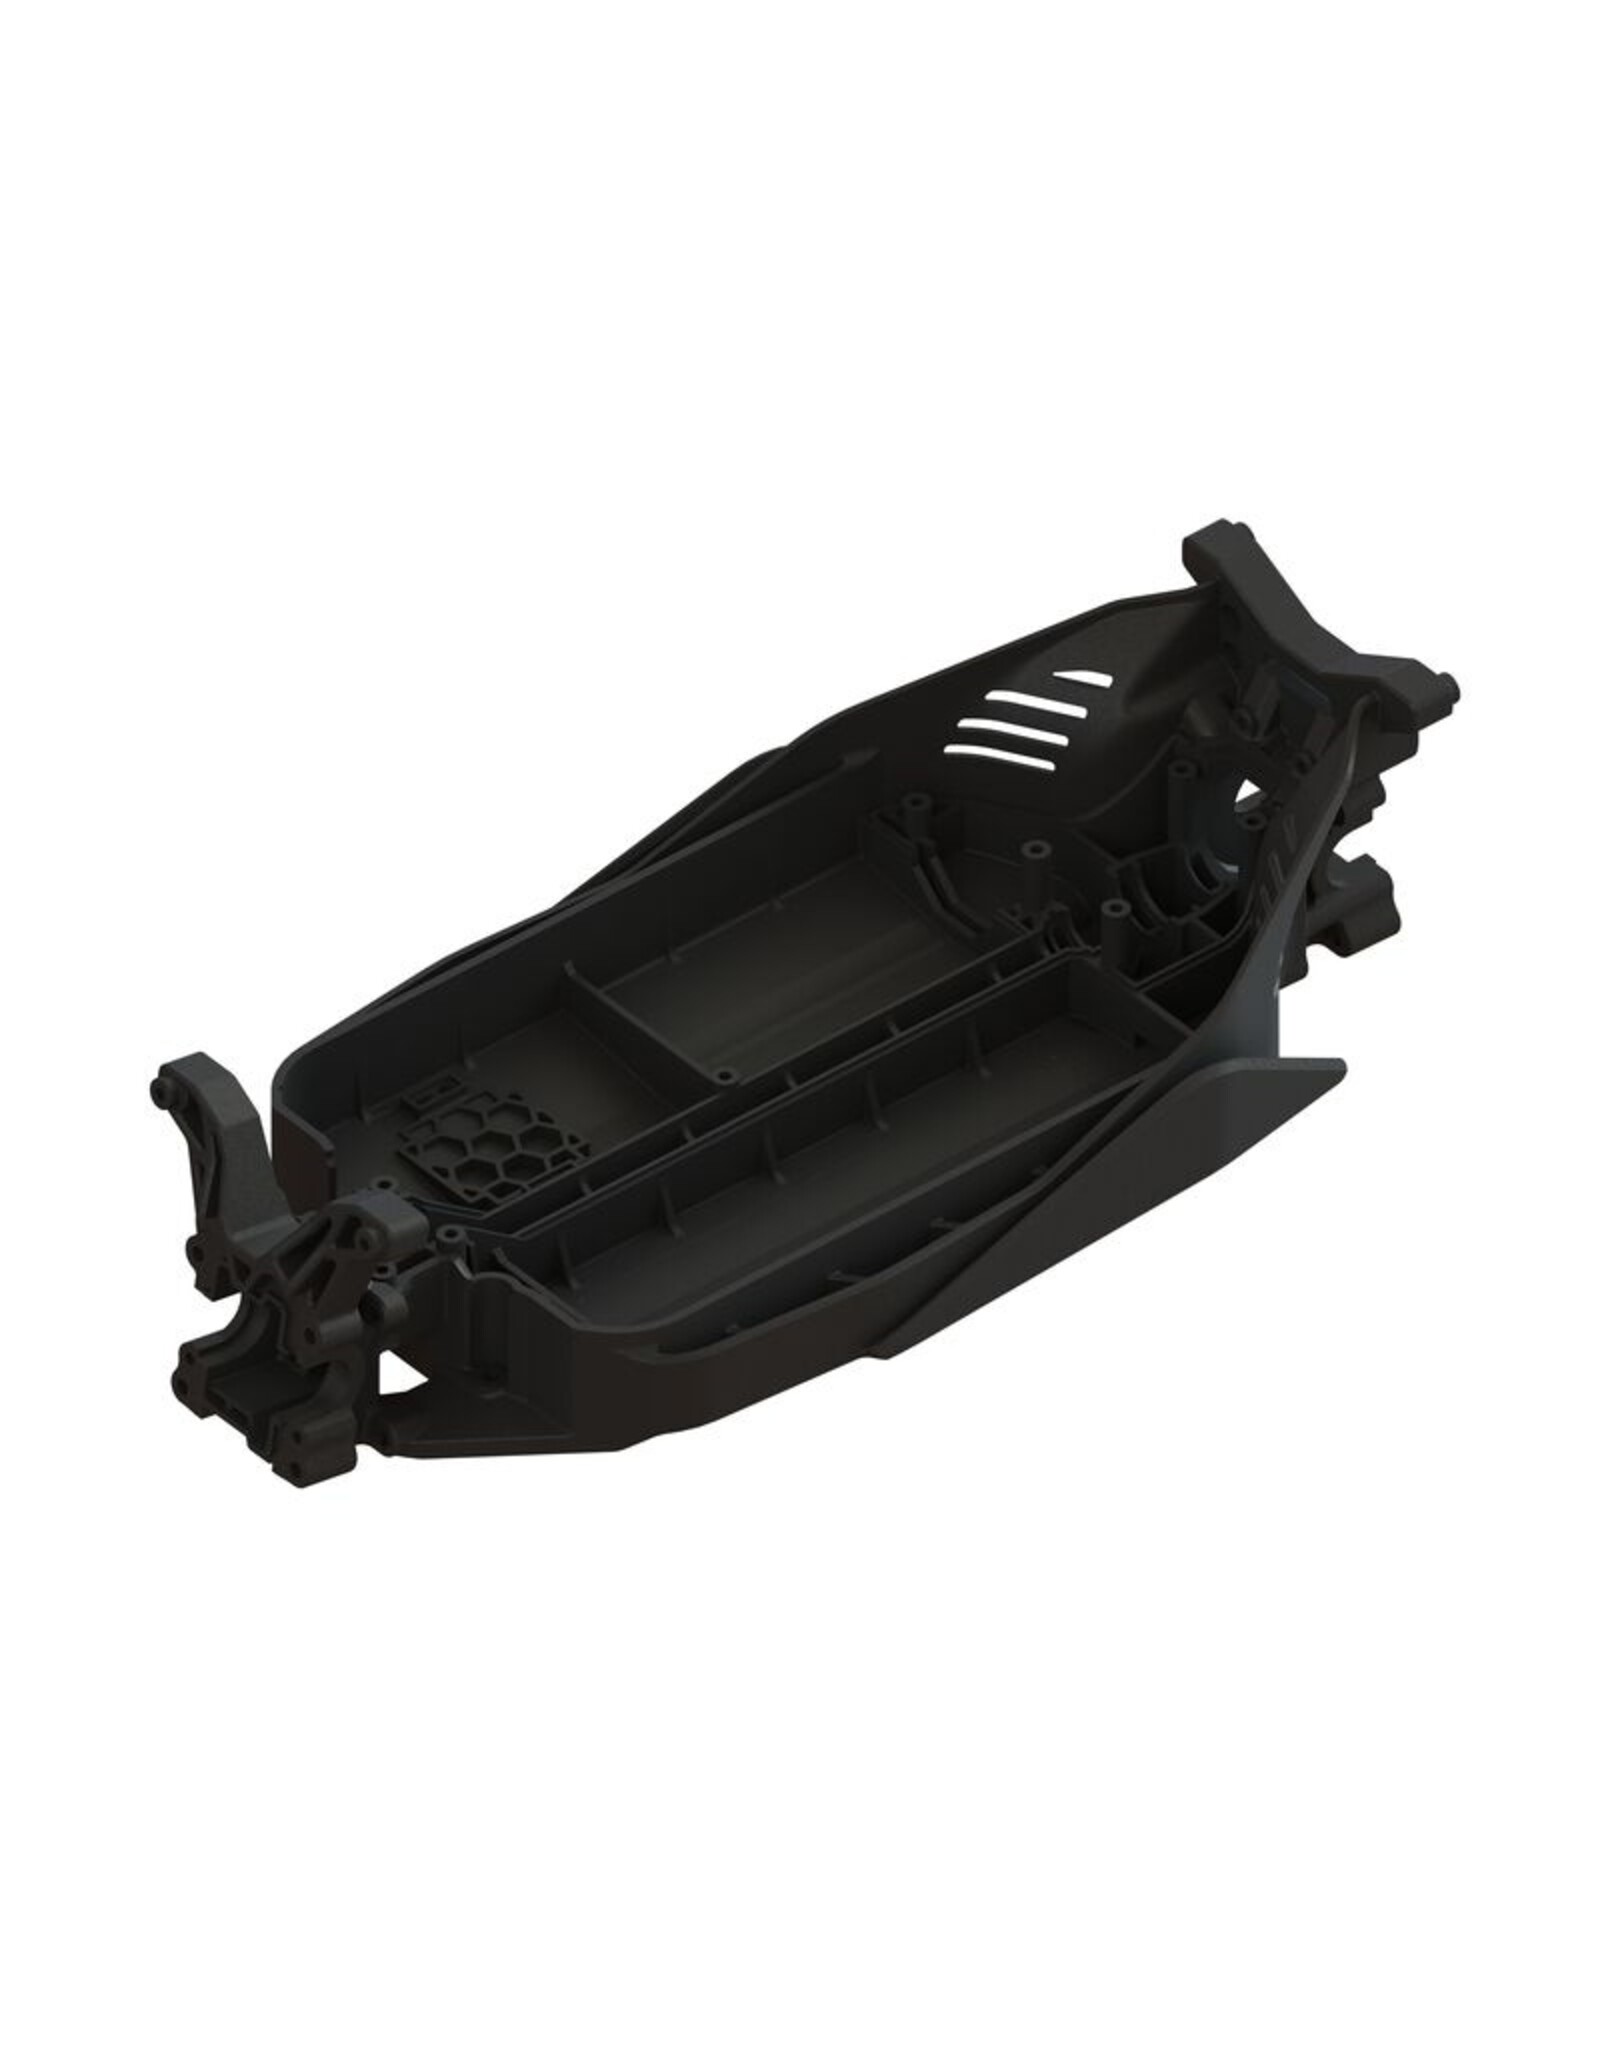 Arrma ARA320809 Composite Chassis (200mm) - GROM